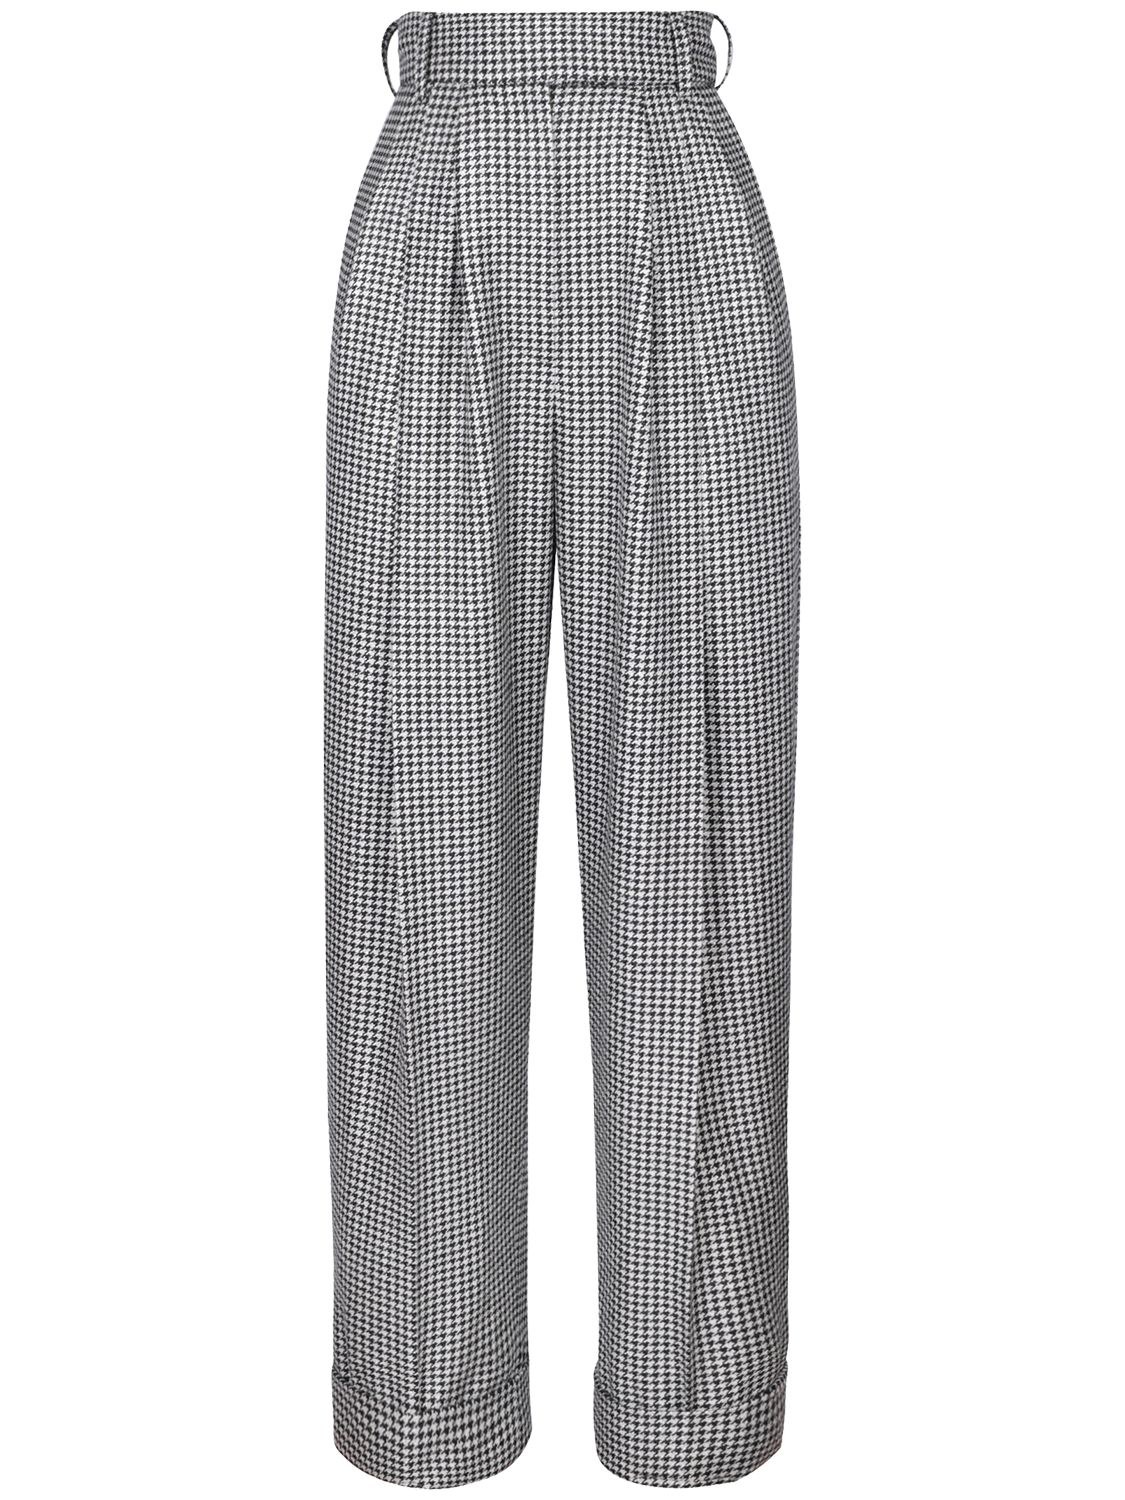 Pleated Houndstooth Pants